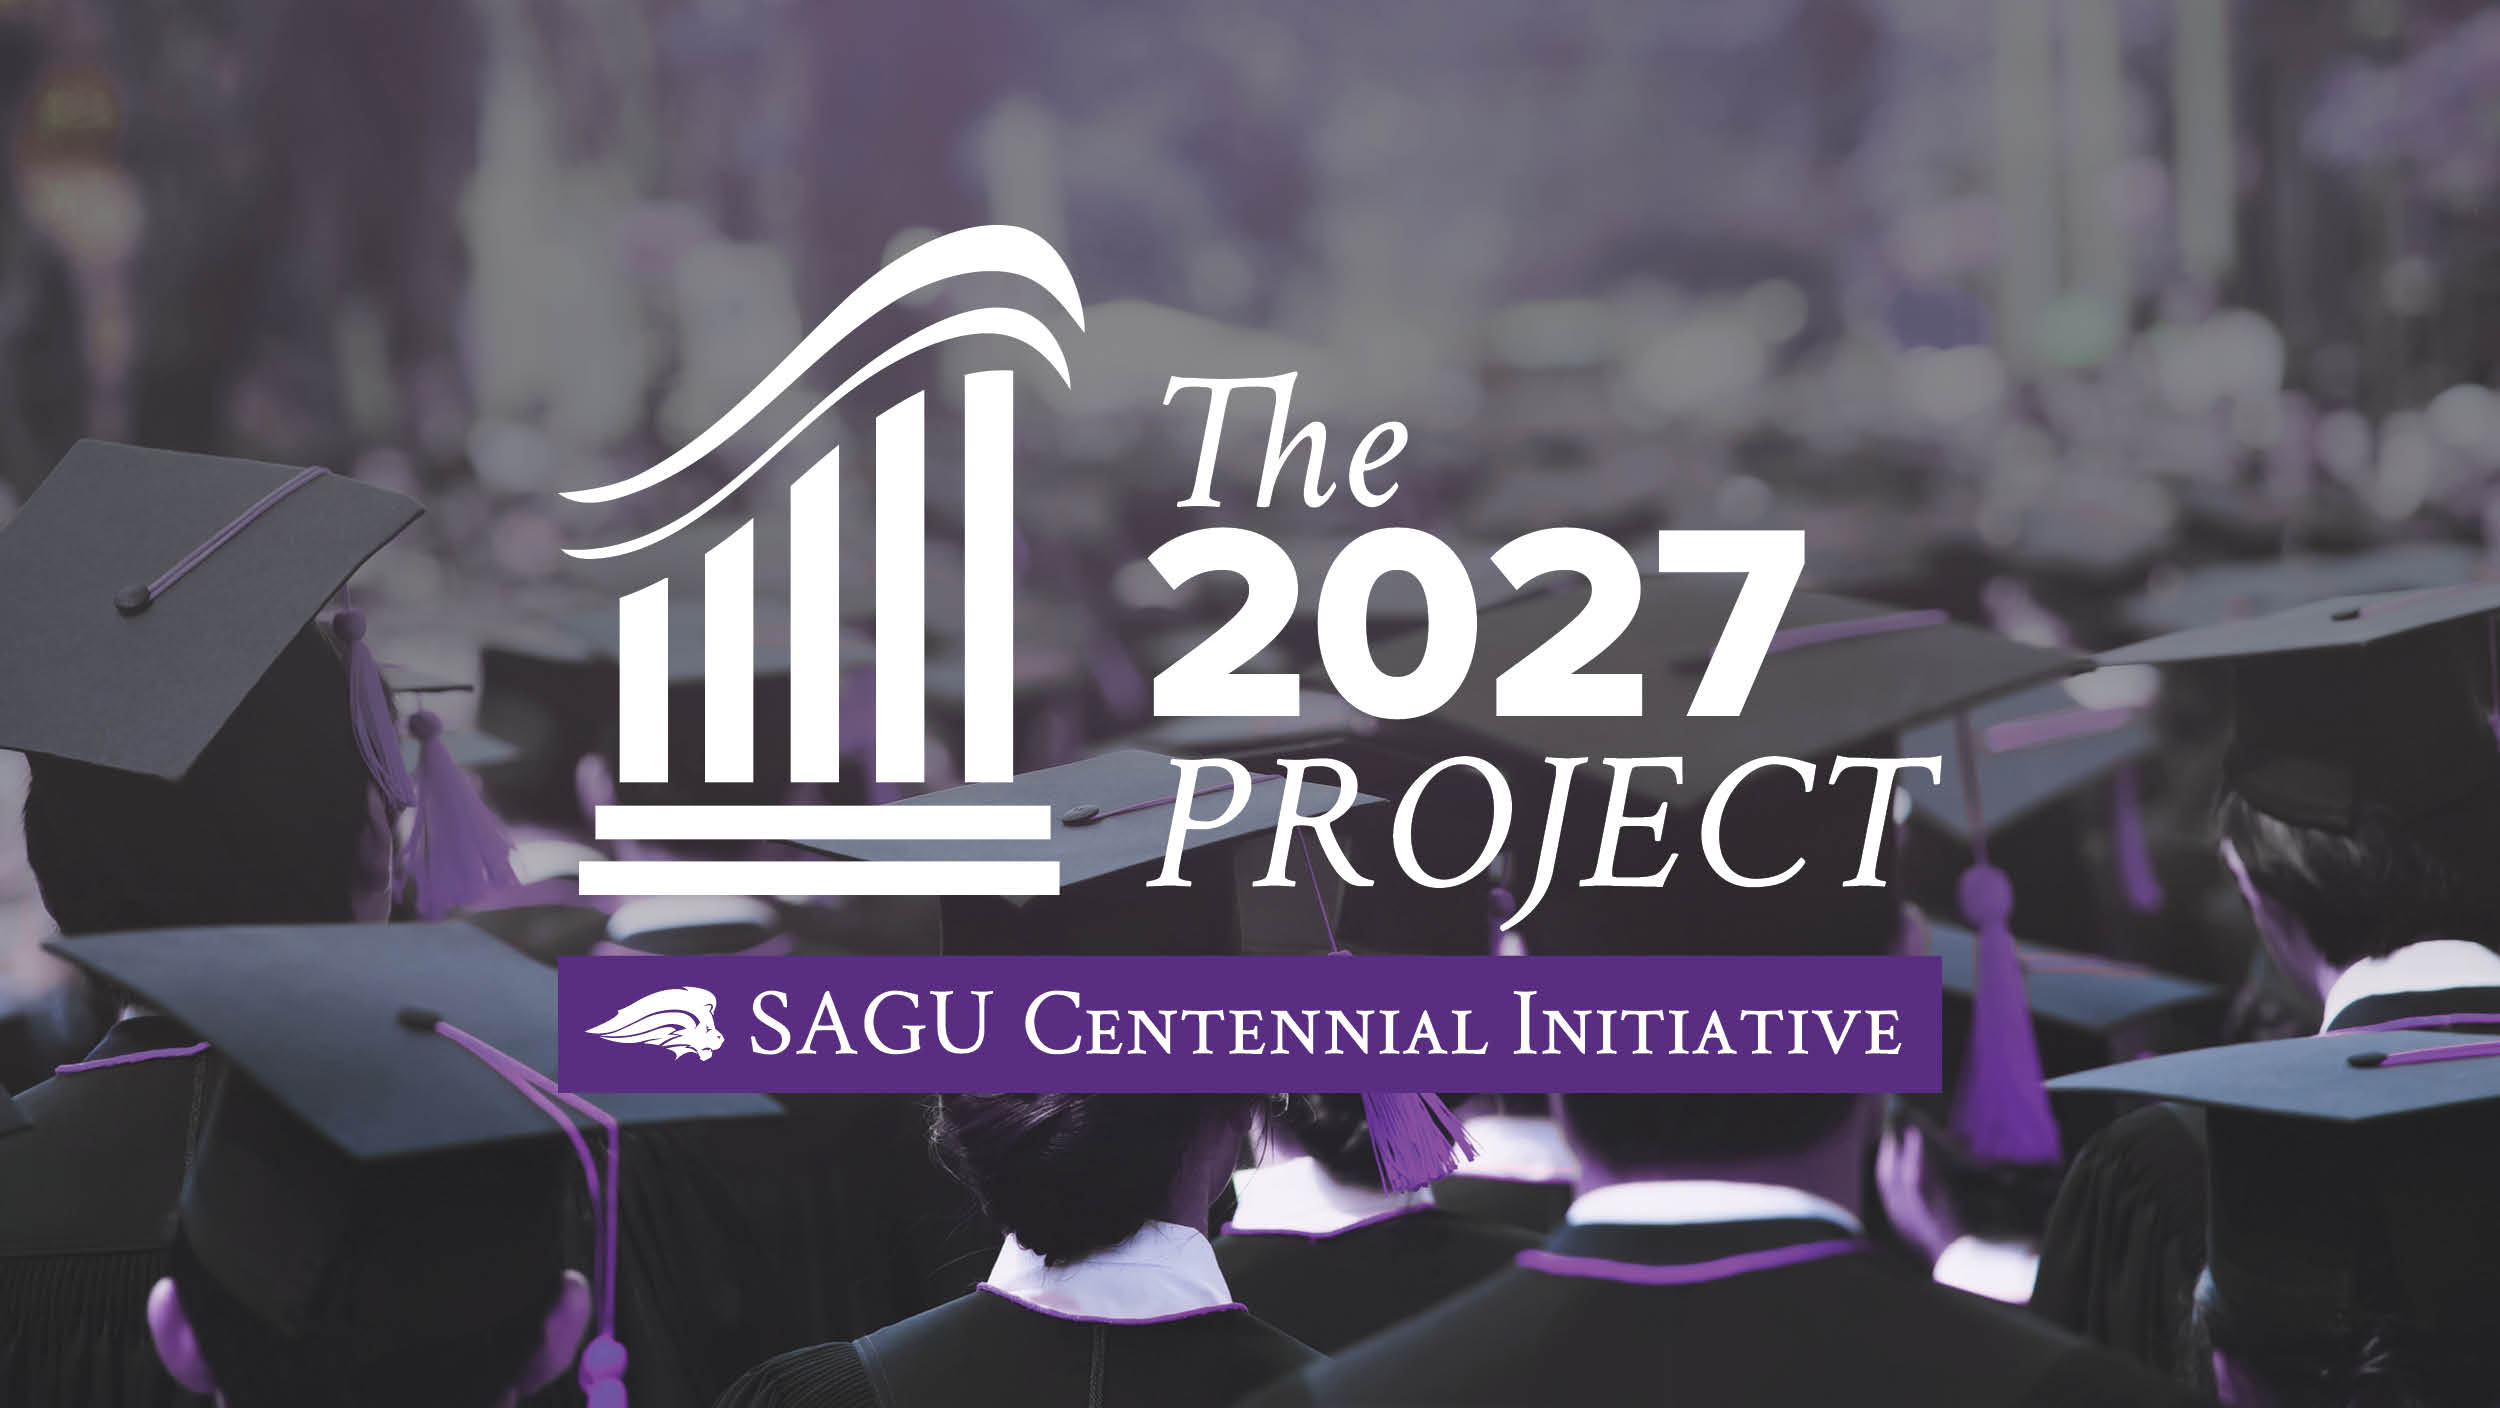 The 2027 Project